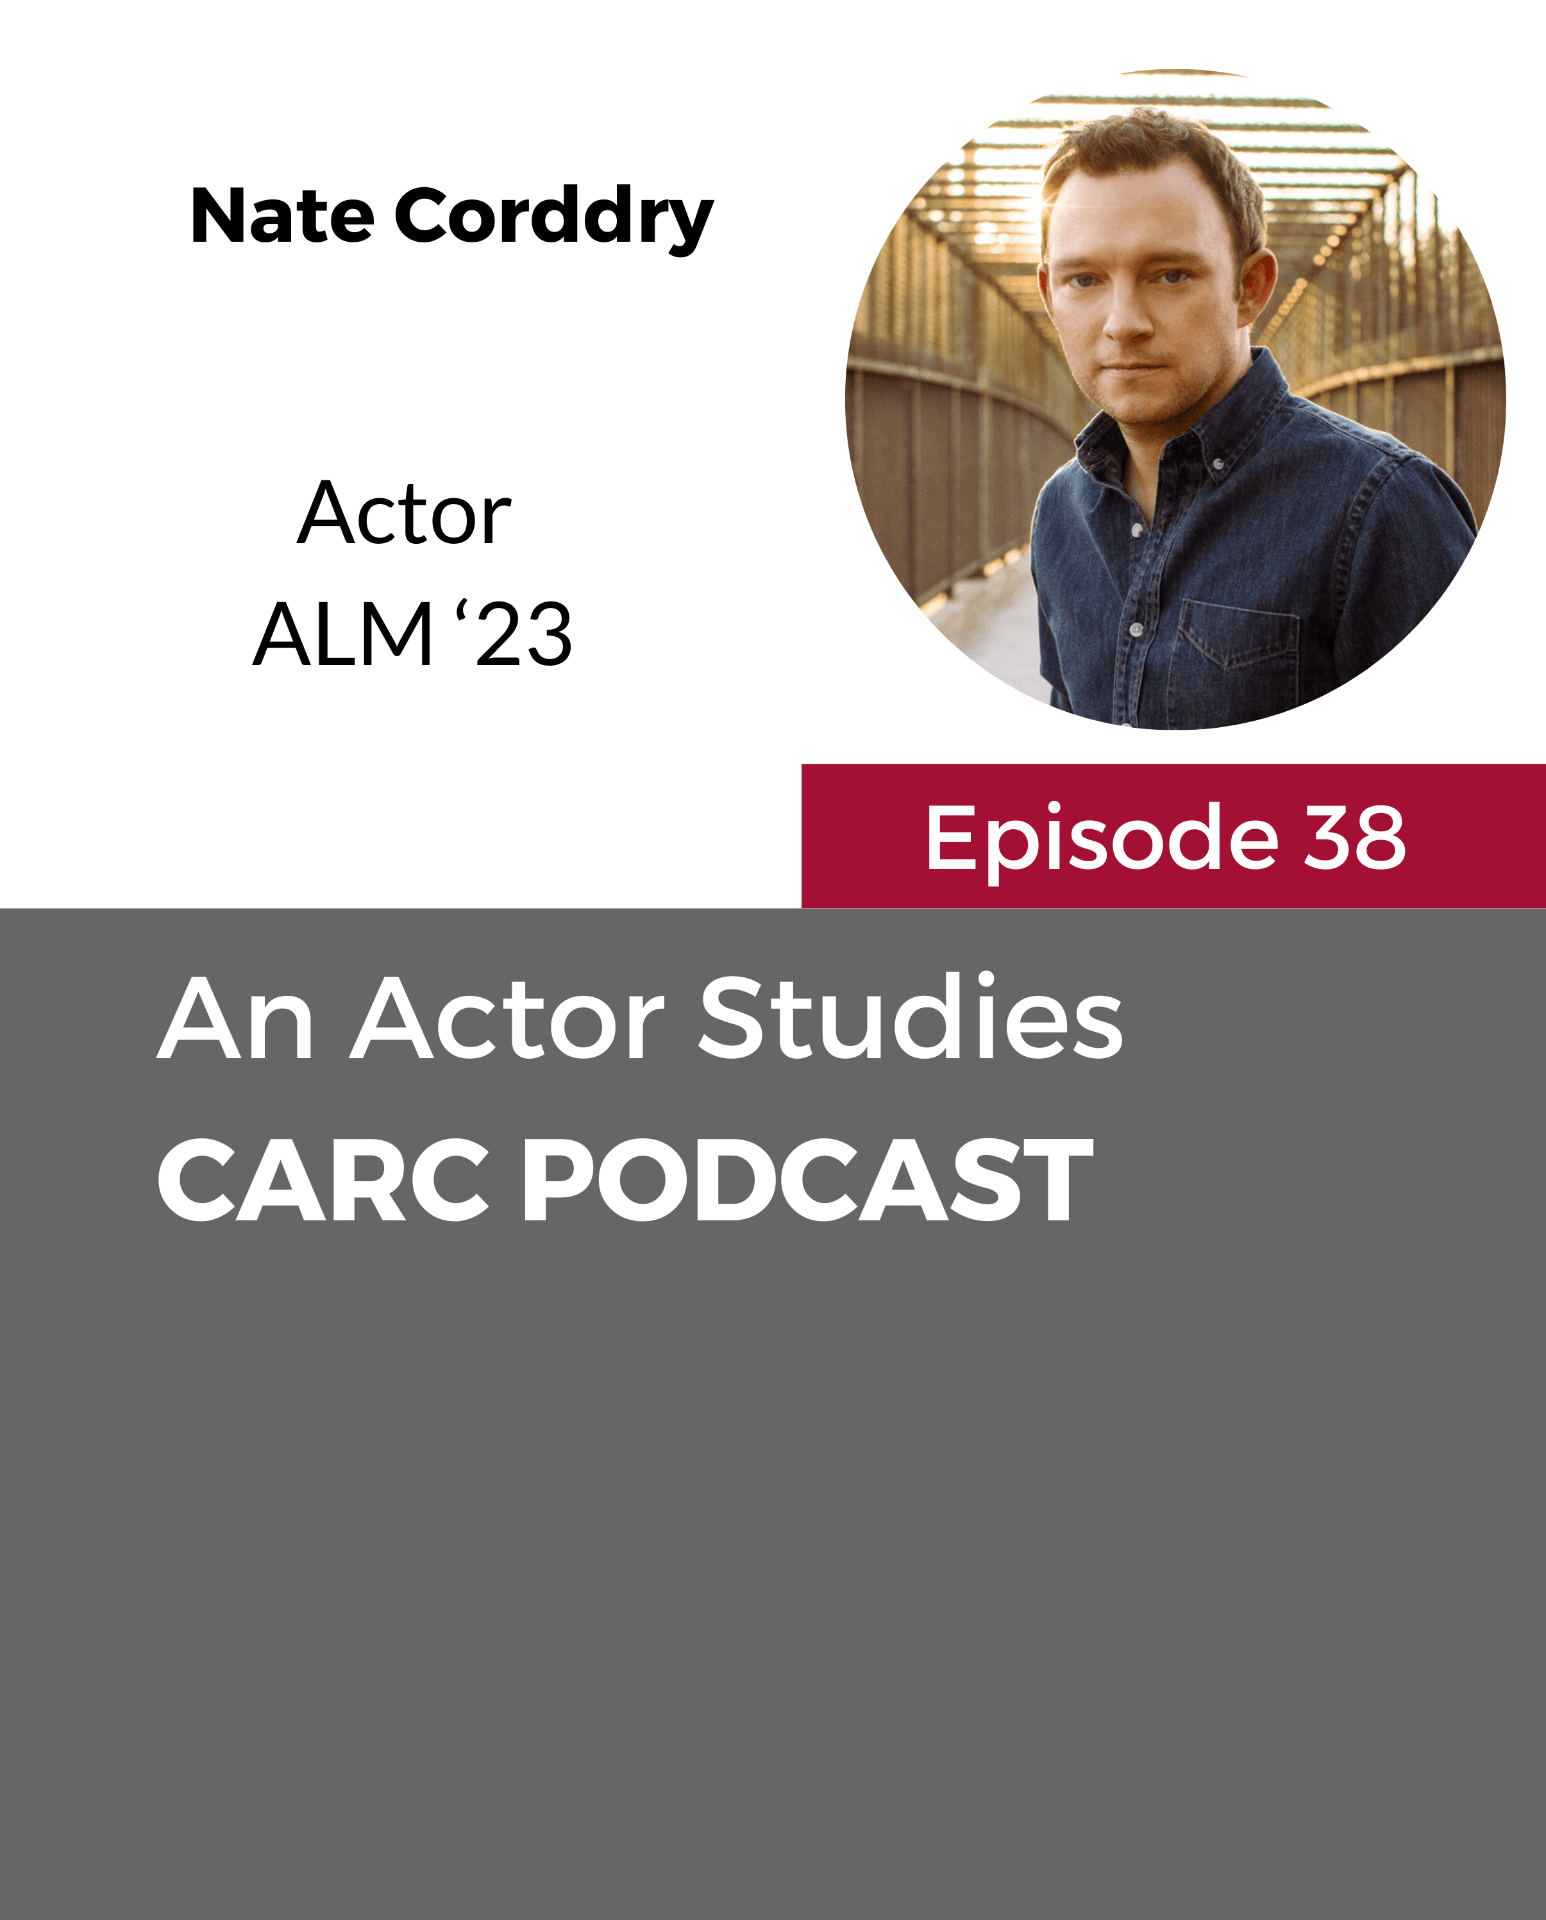 CARC Podcast, Episode 38, An Actor Studies, with Nate Corddry